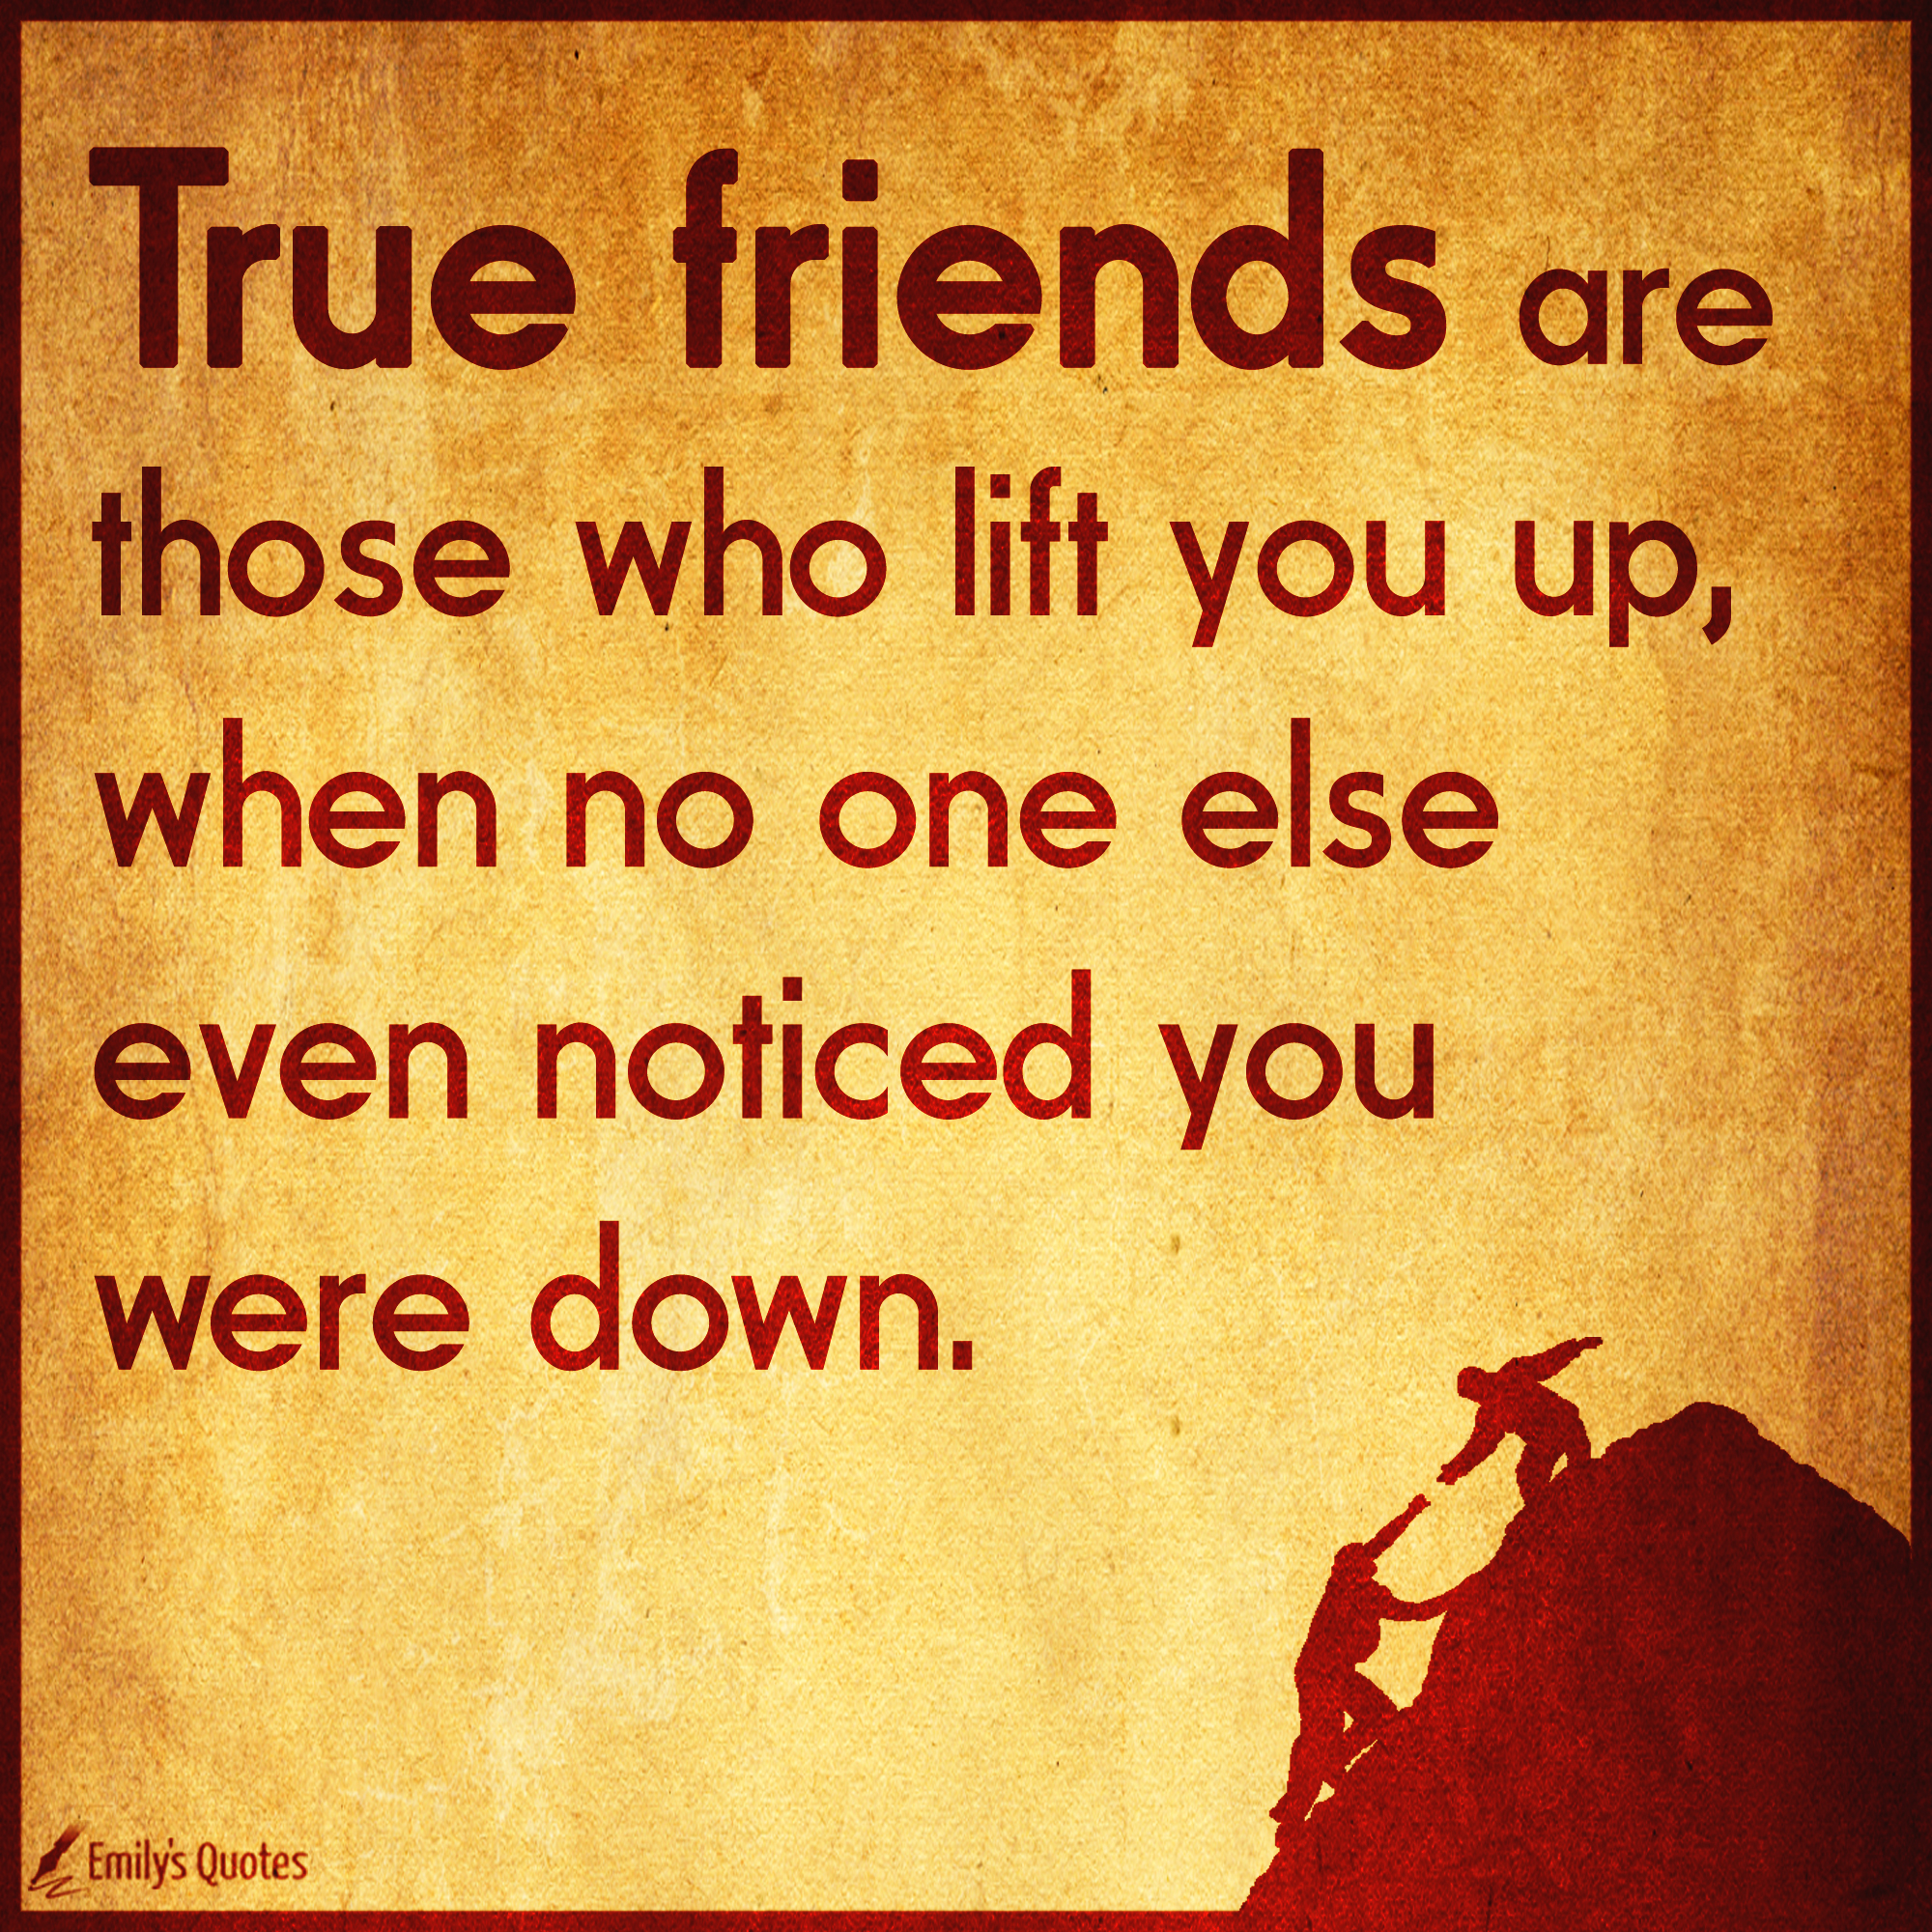 True friends are those who lift you up, when no one else even noticed